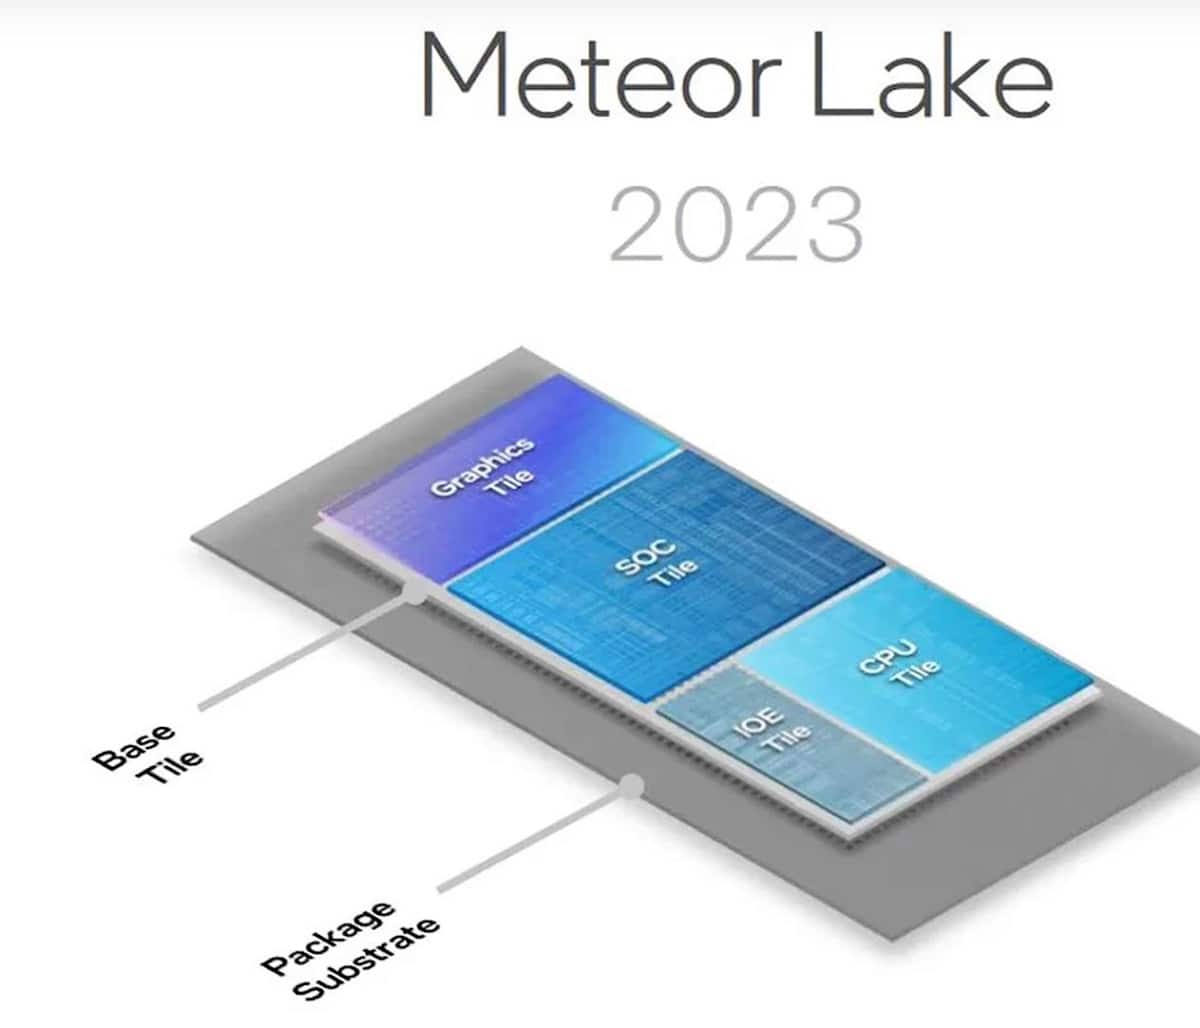 Where are the Meteor Lake CPUs? The latest intel from Intel